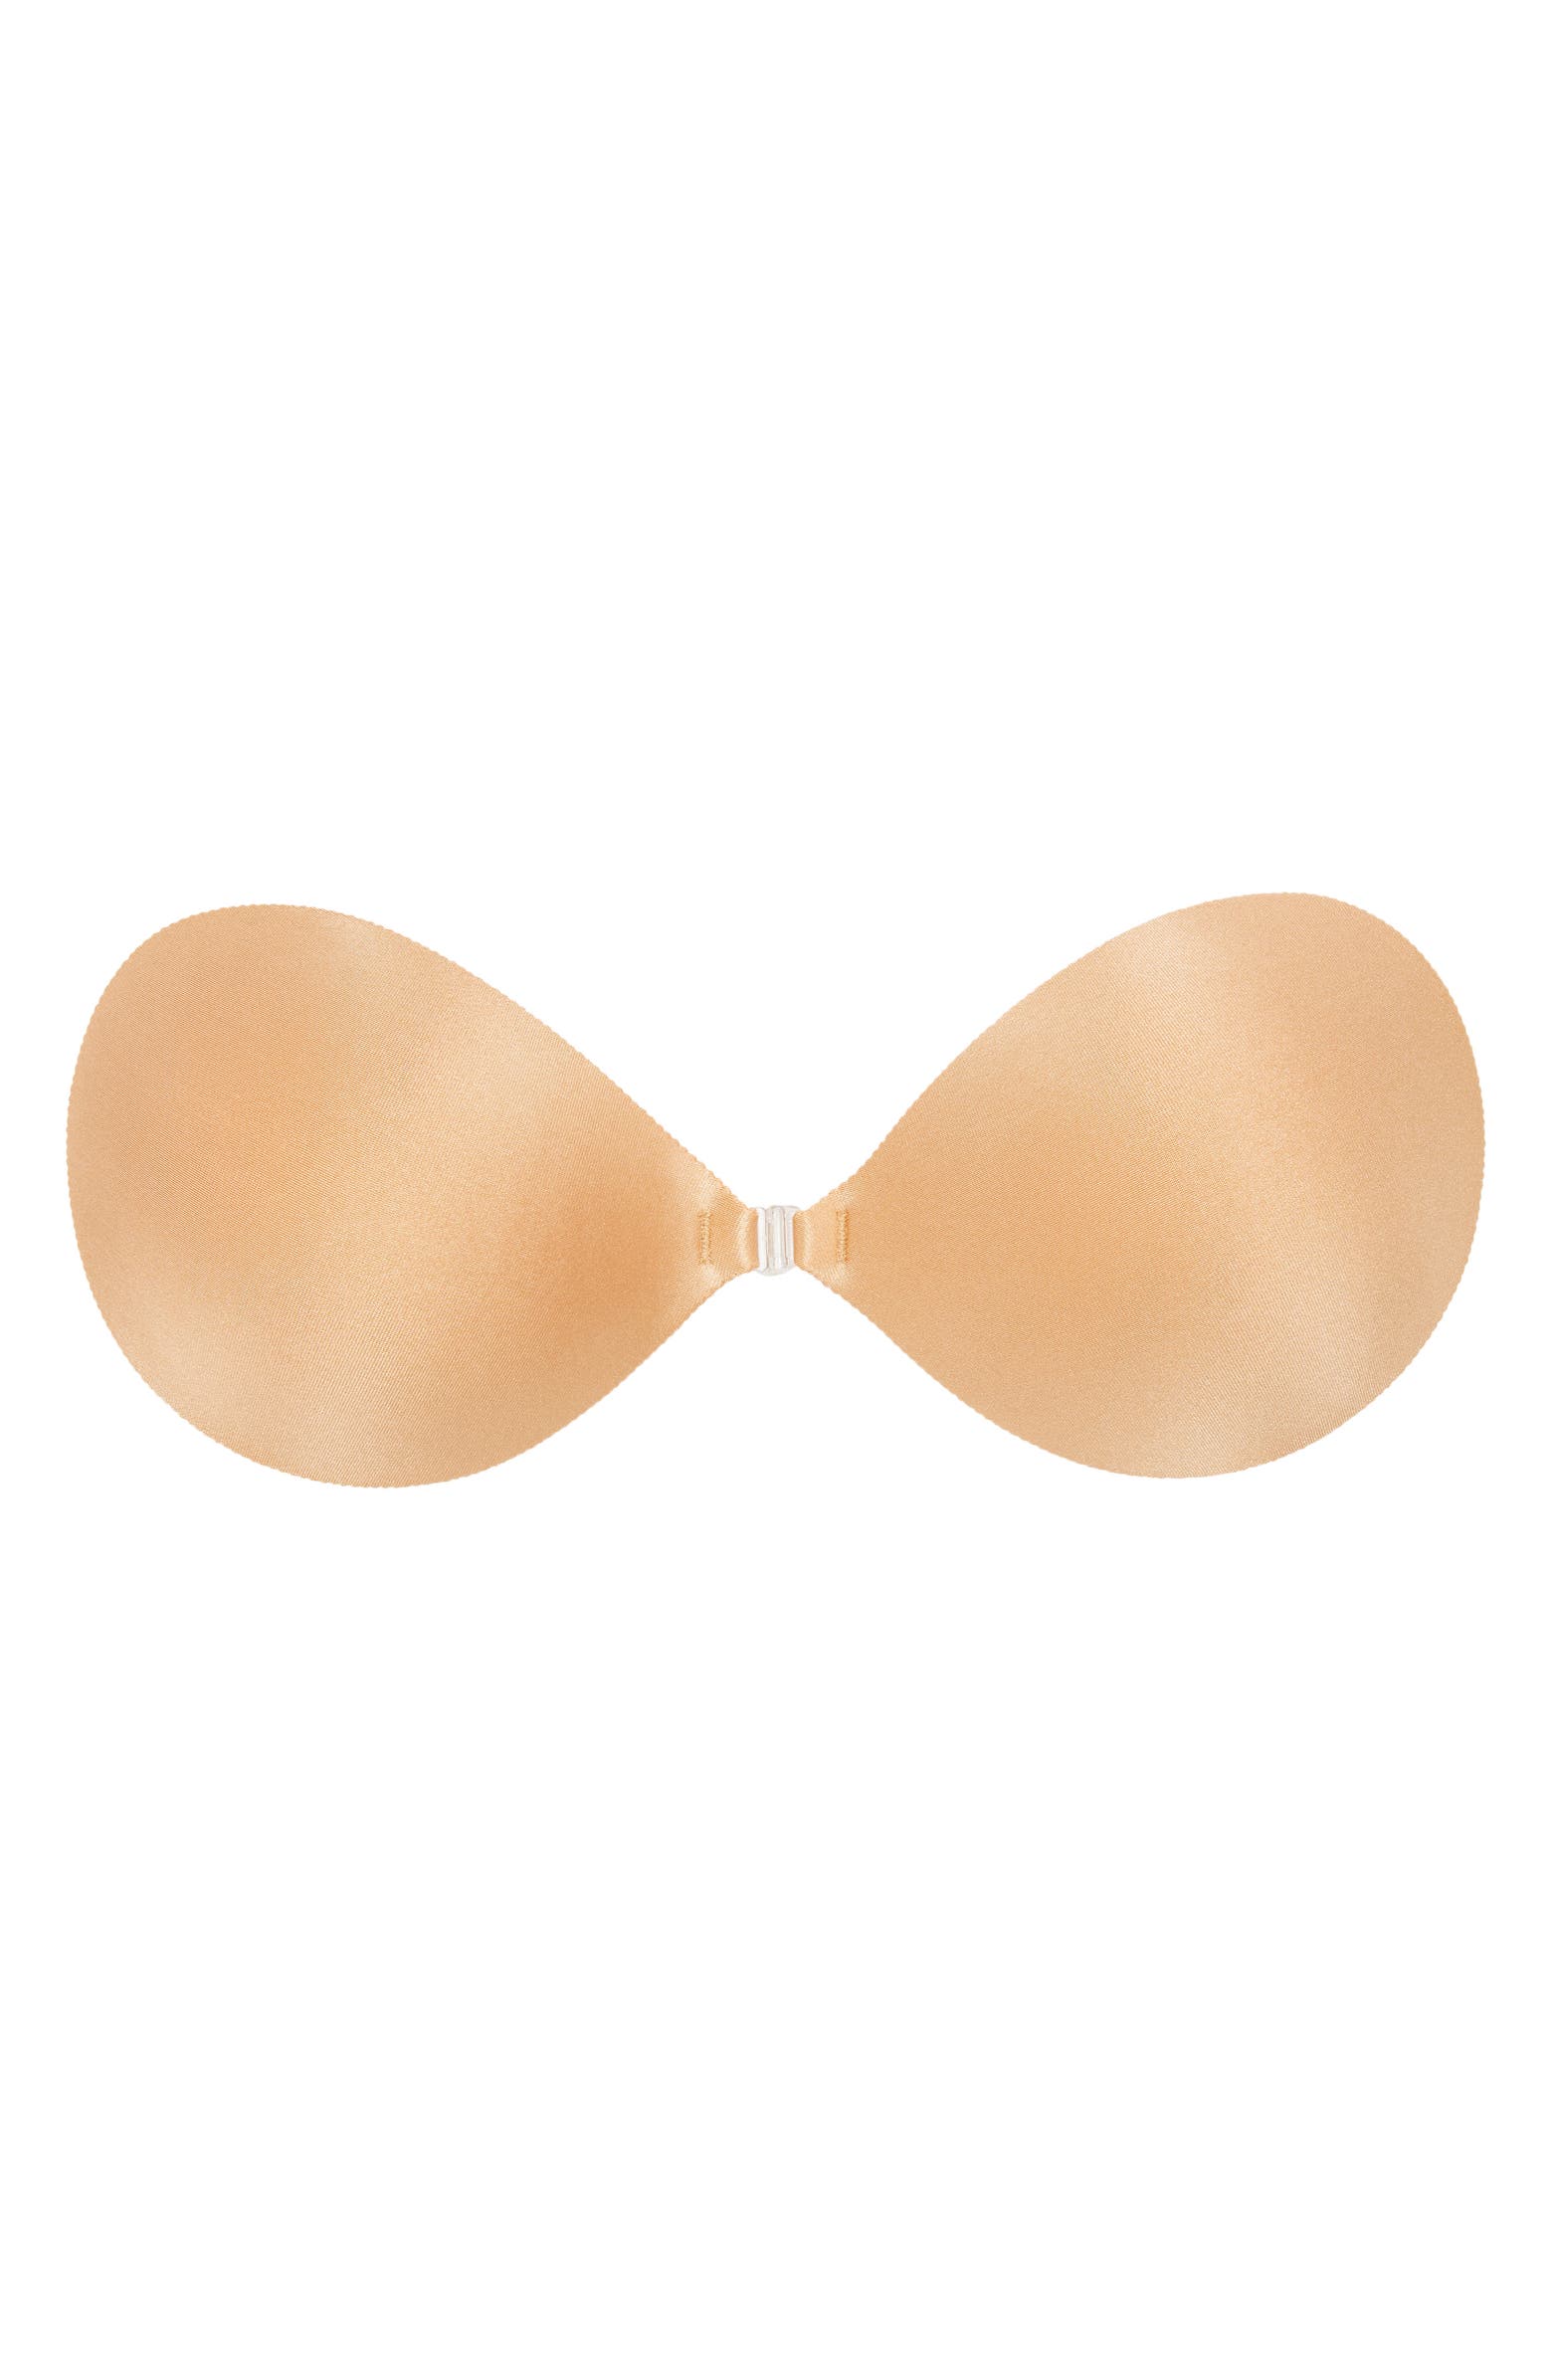 Buy D Club Silicone Bra Inserts Lift Breast Pads Breathable Push Up Sticky  Bra Cups for Women (3 Pairs), 3 Beige, Medium at